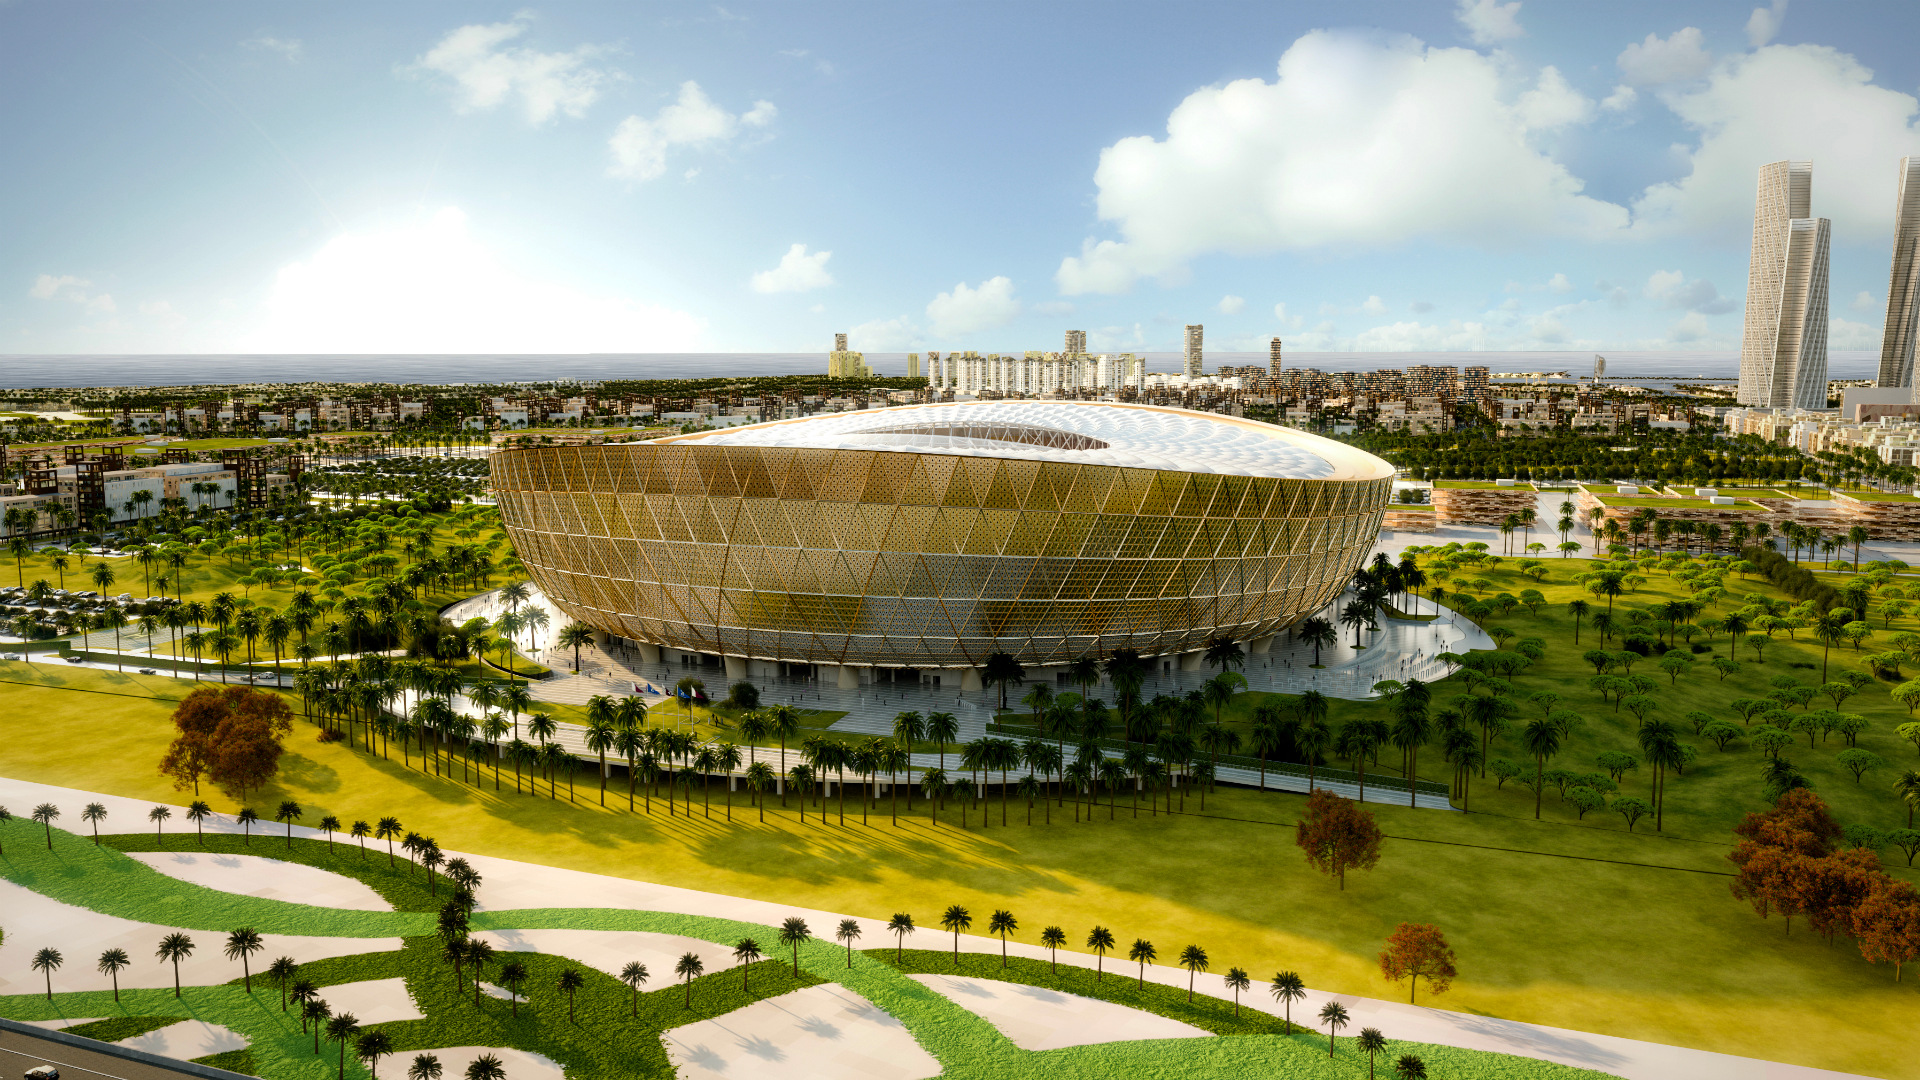 Five Key Facts about Lusail Stadium